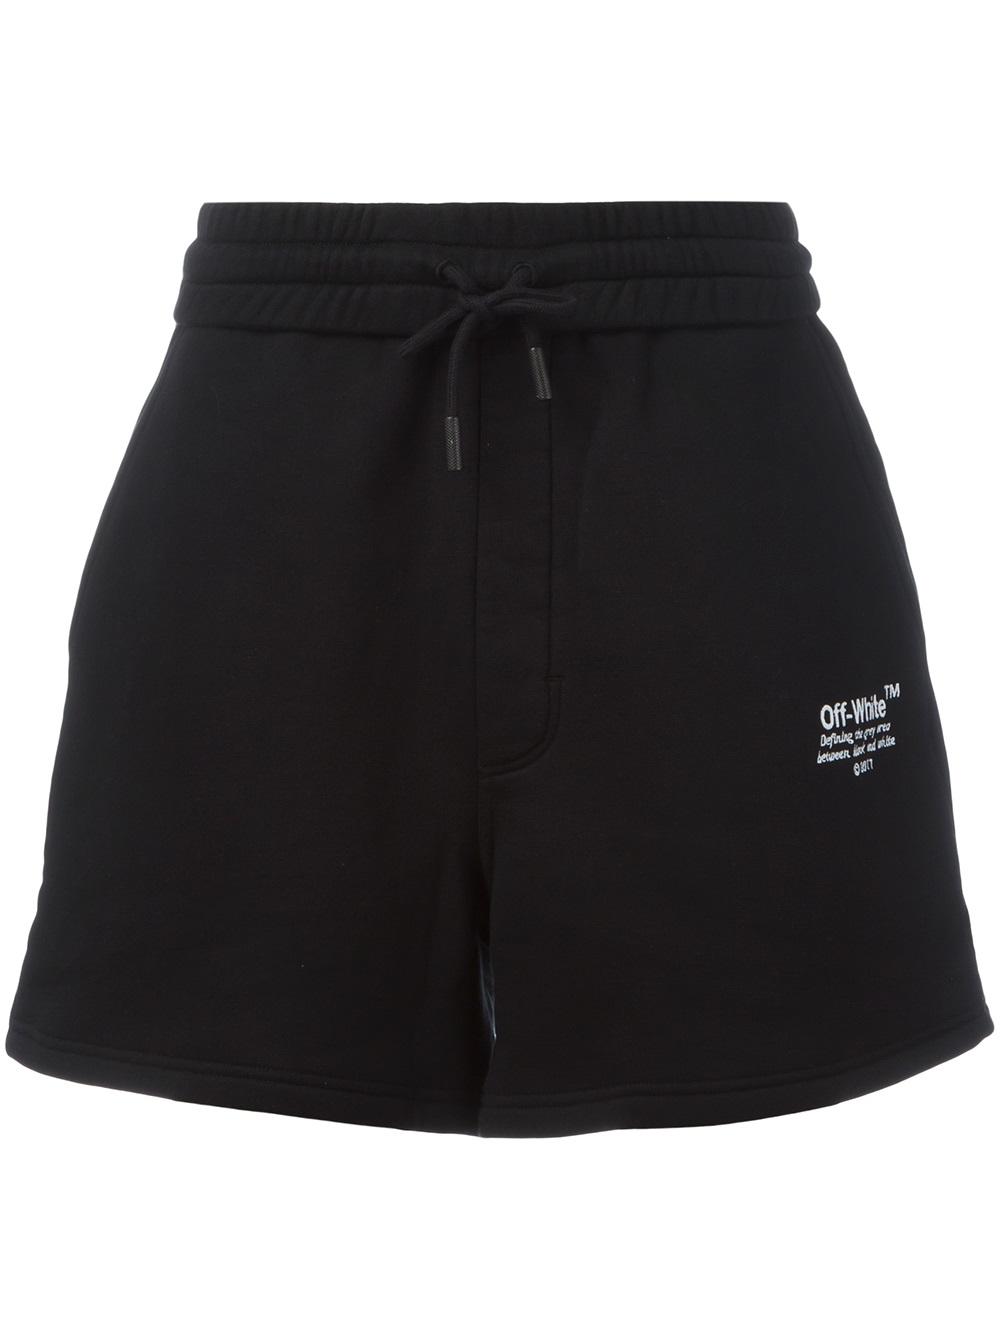 Off-White embroidered track shorts 1001 BLACK Men Clothing & Running